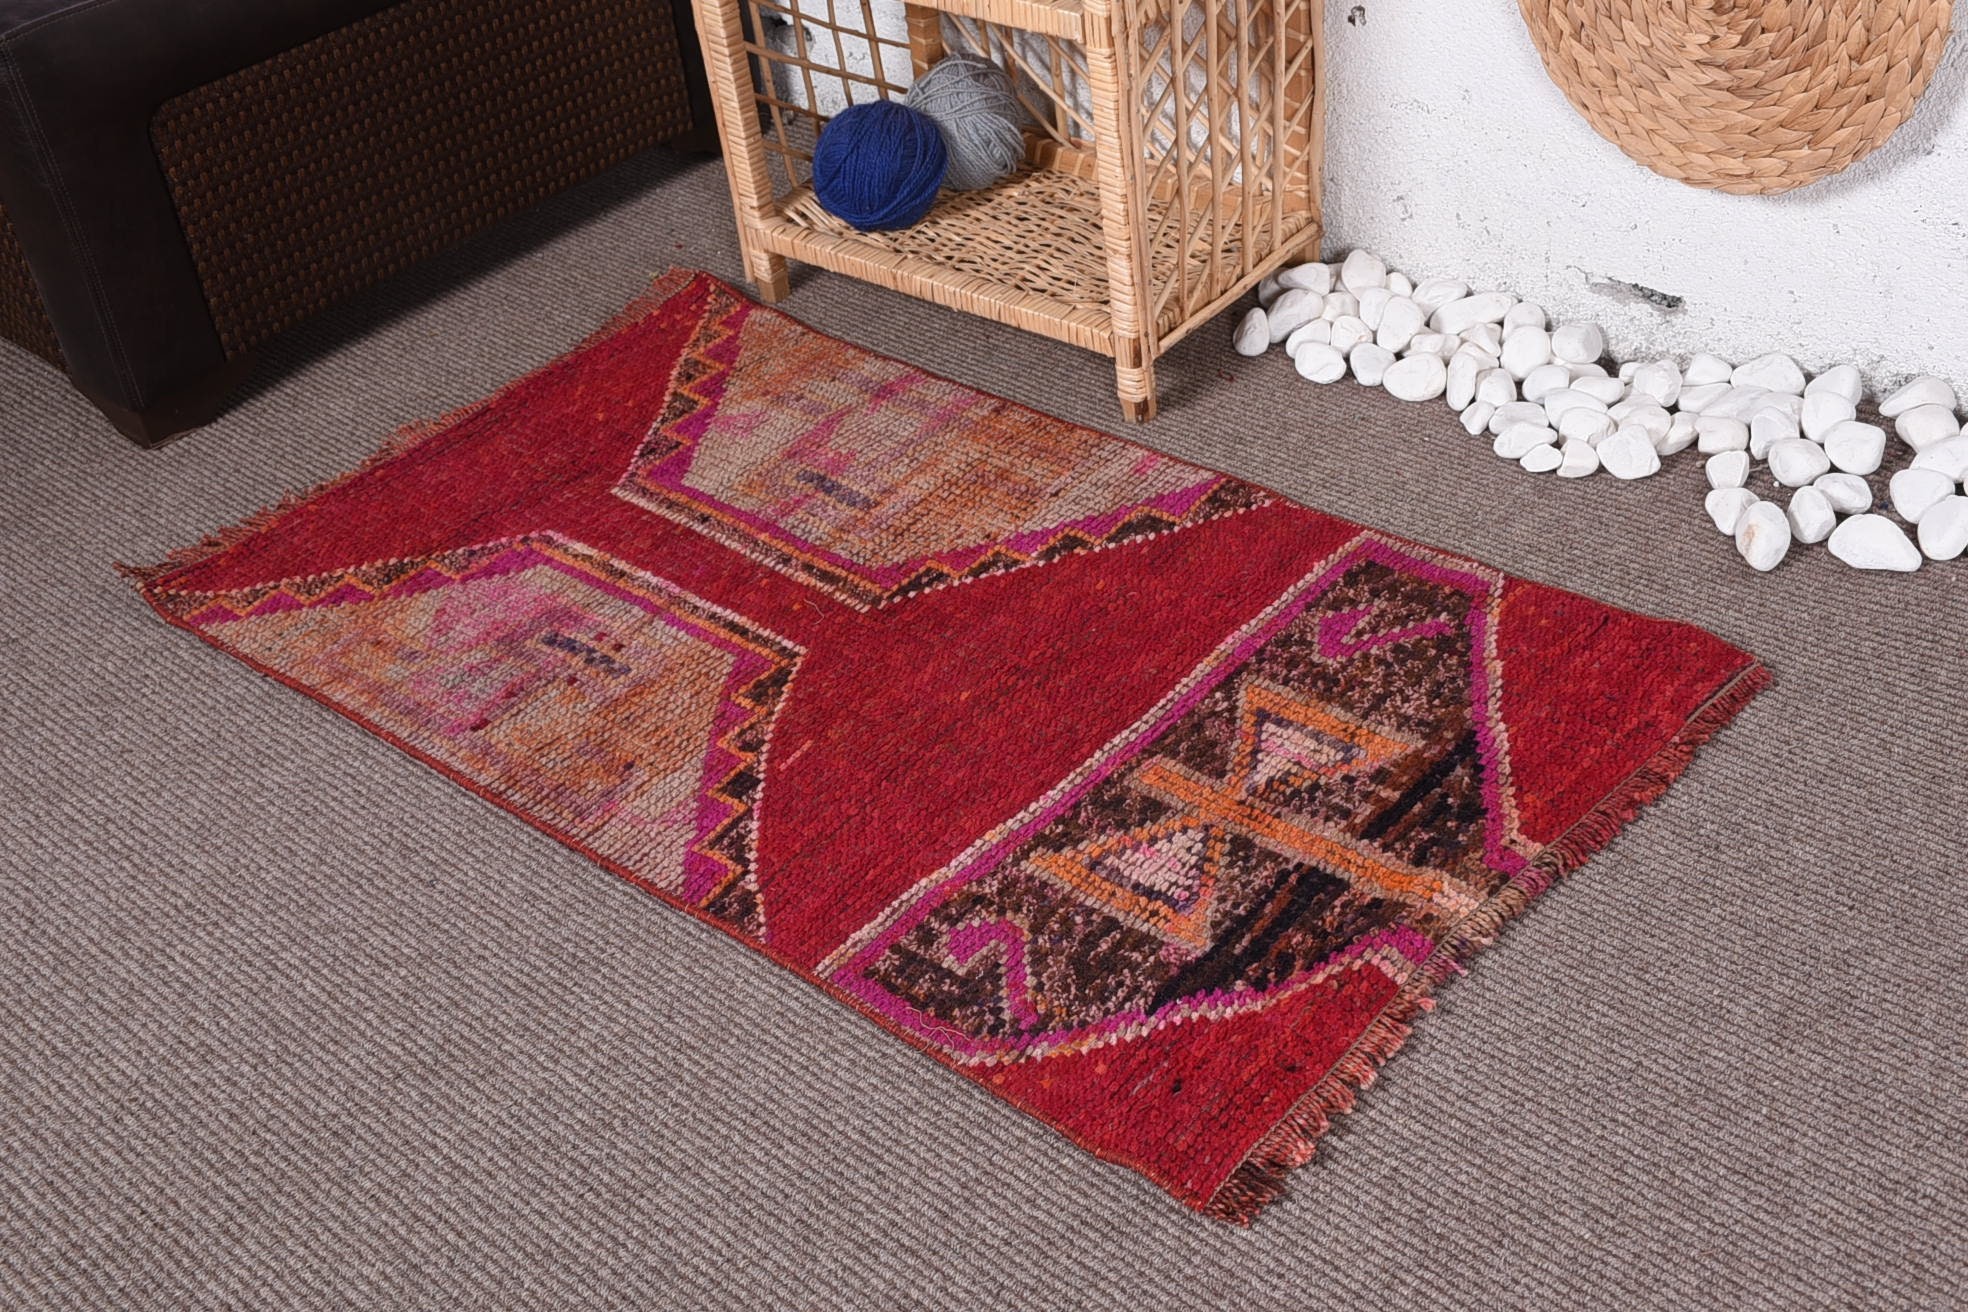 Red Kitchen Rug, Kitchen Rugs, Turkish Rug, Wall Hanging Rug, 2.2x3.8 ft Small Rugs, Bath Rugs, Cute Rugs, Vintage Rug